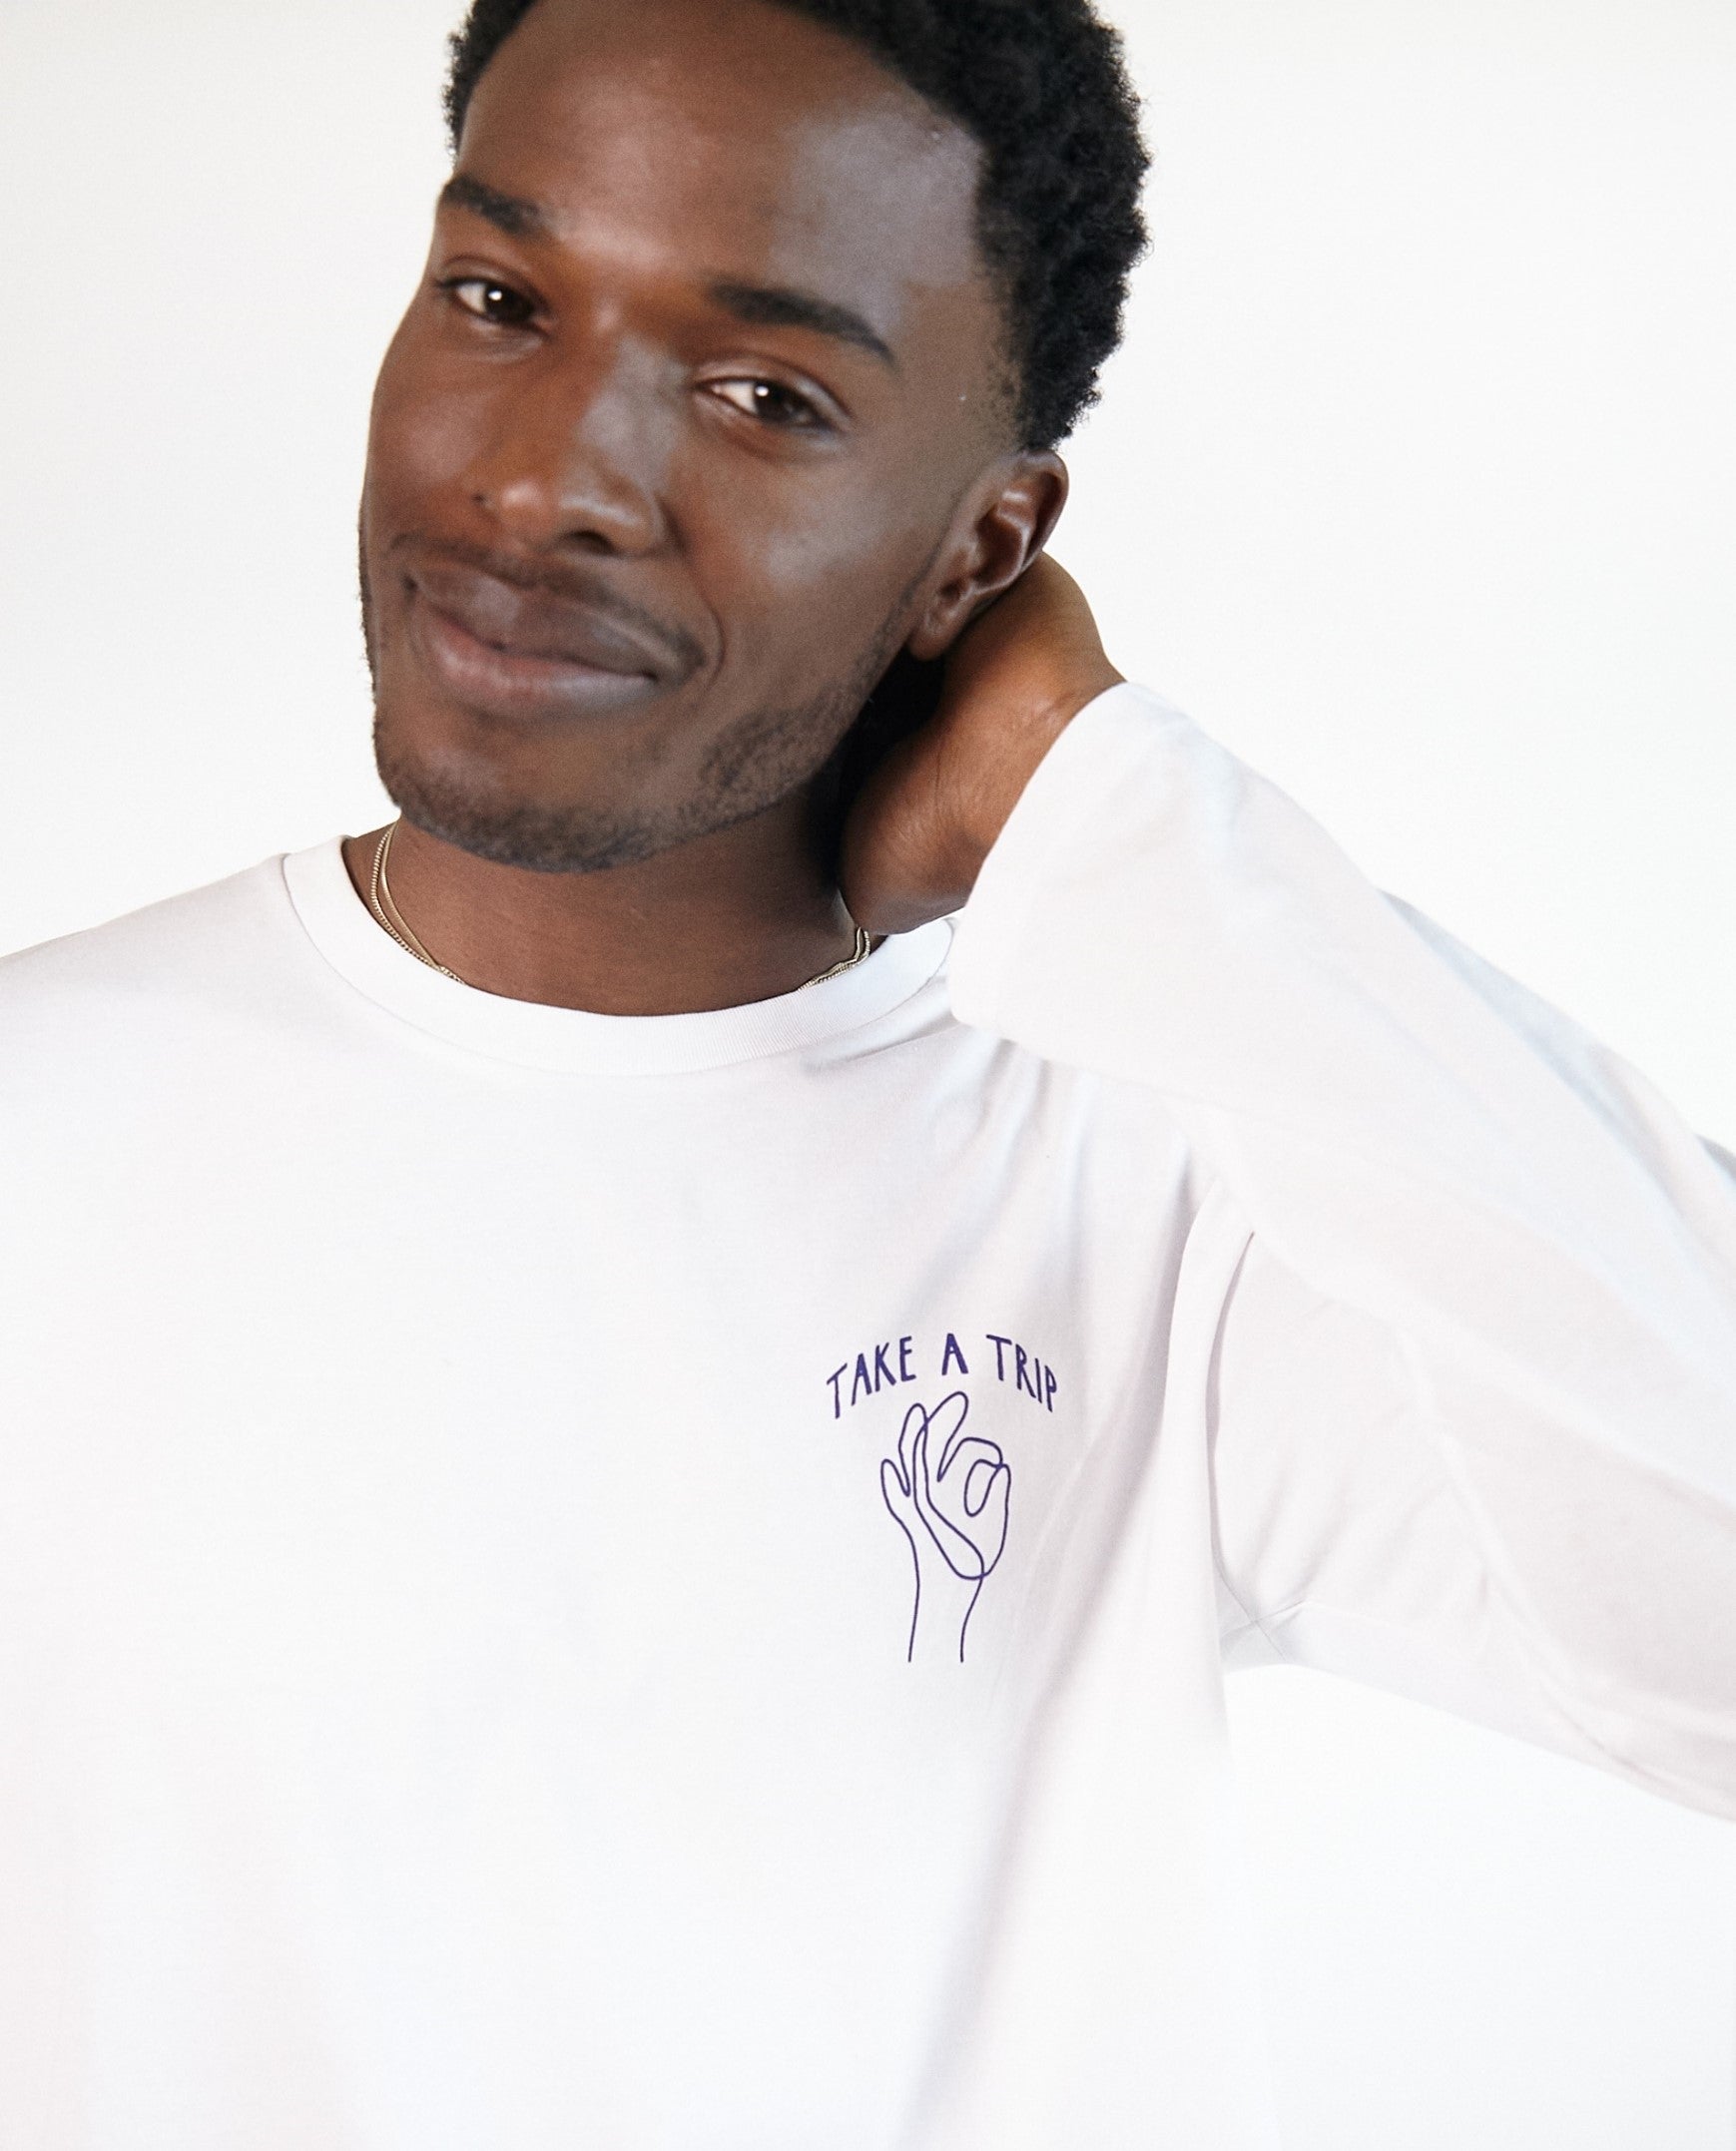 product-featured no-display long white tee man new